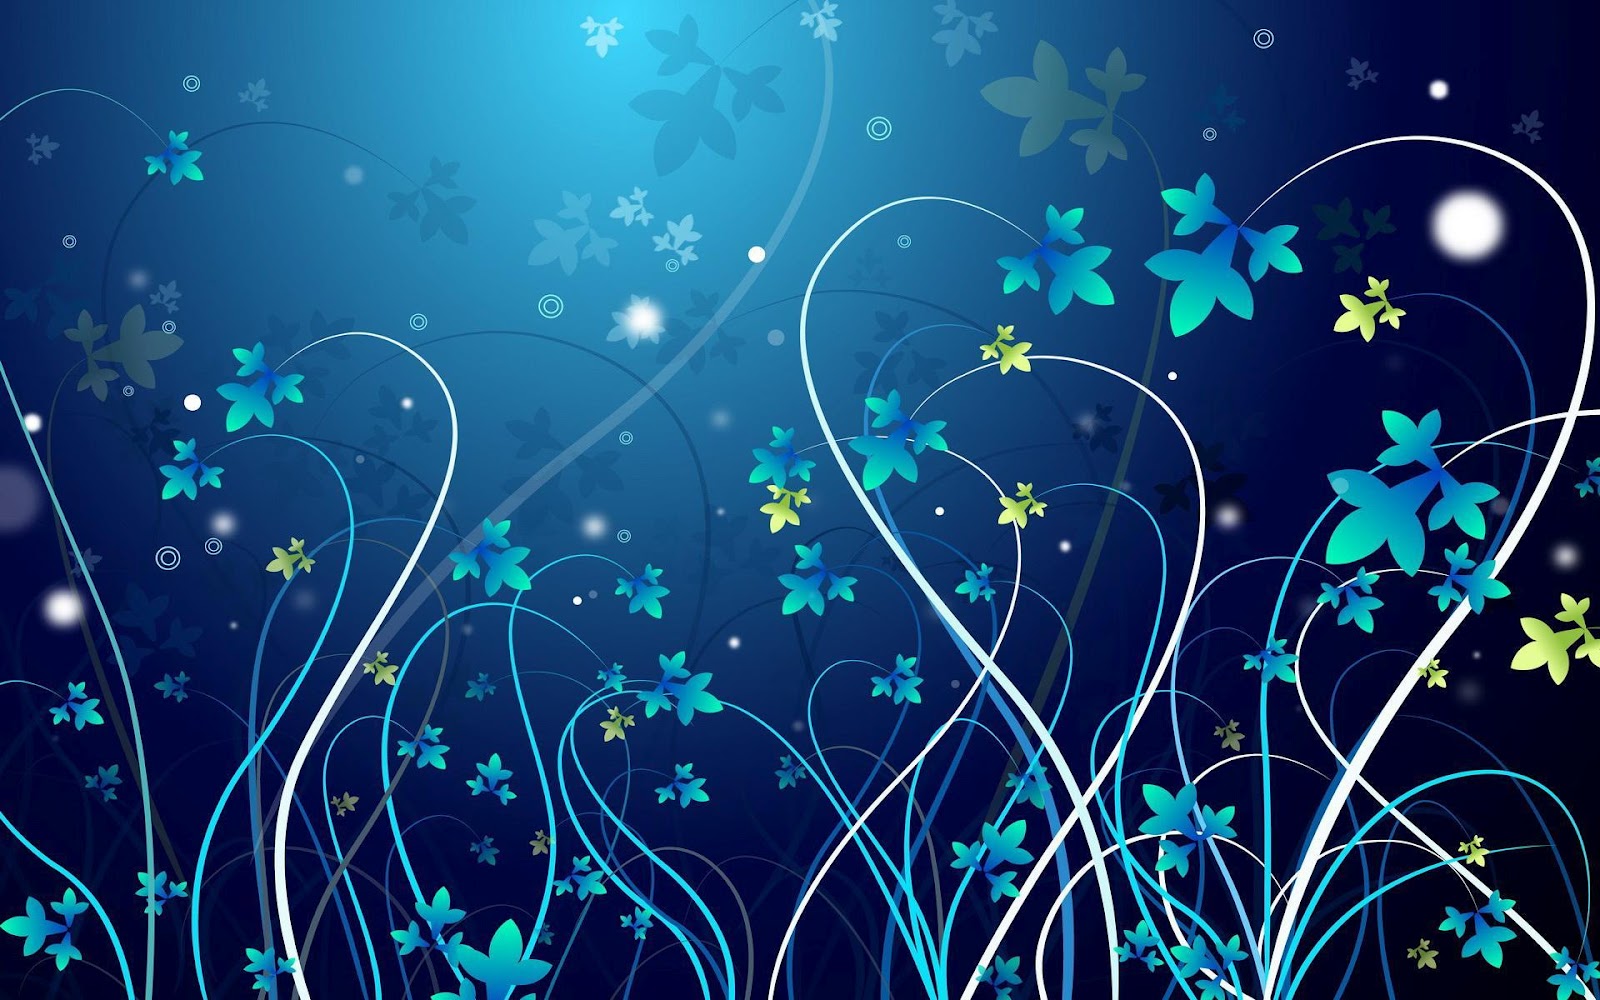 Abstract Flowers wallpaper